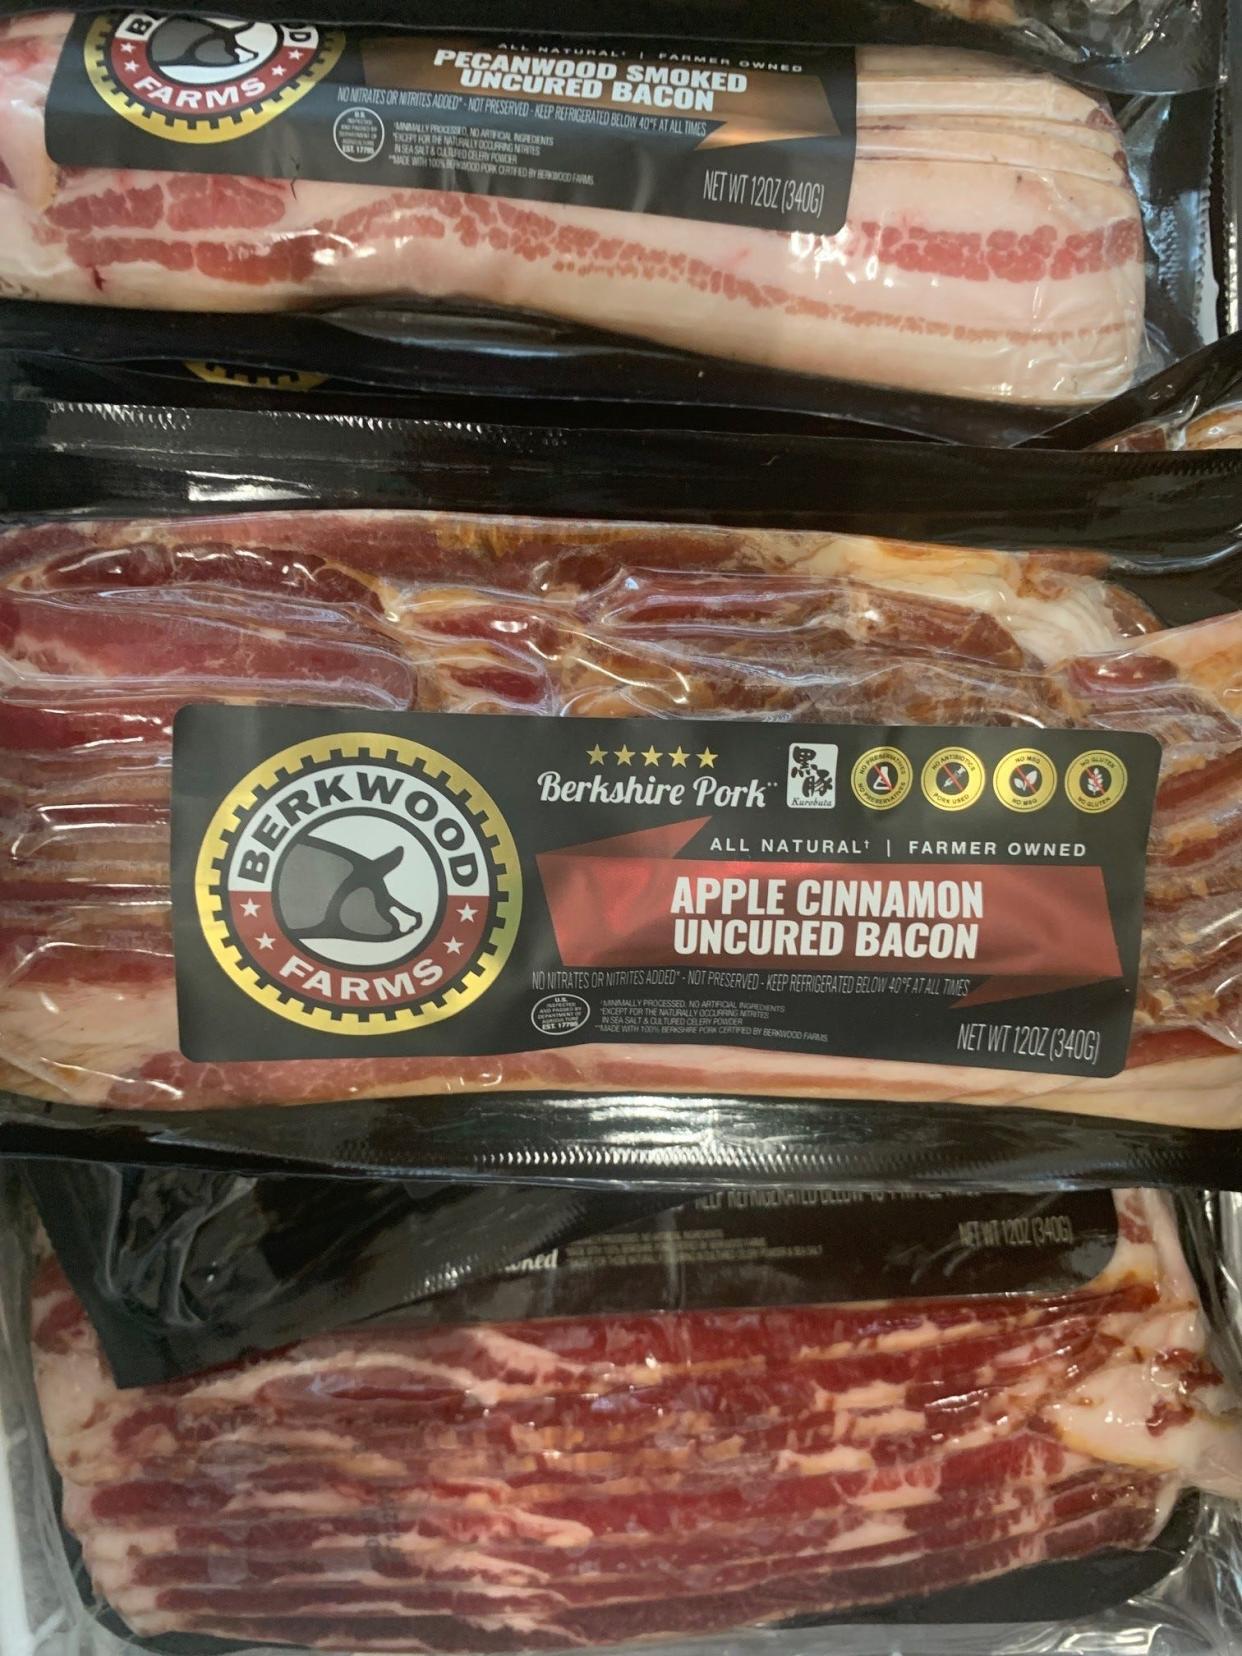 Apple Cinnamon Bacon is just one of the specialty products available from Berkwood Farms in Des Moines